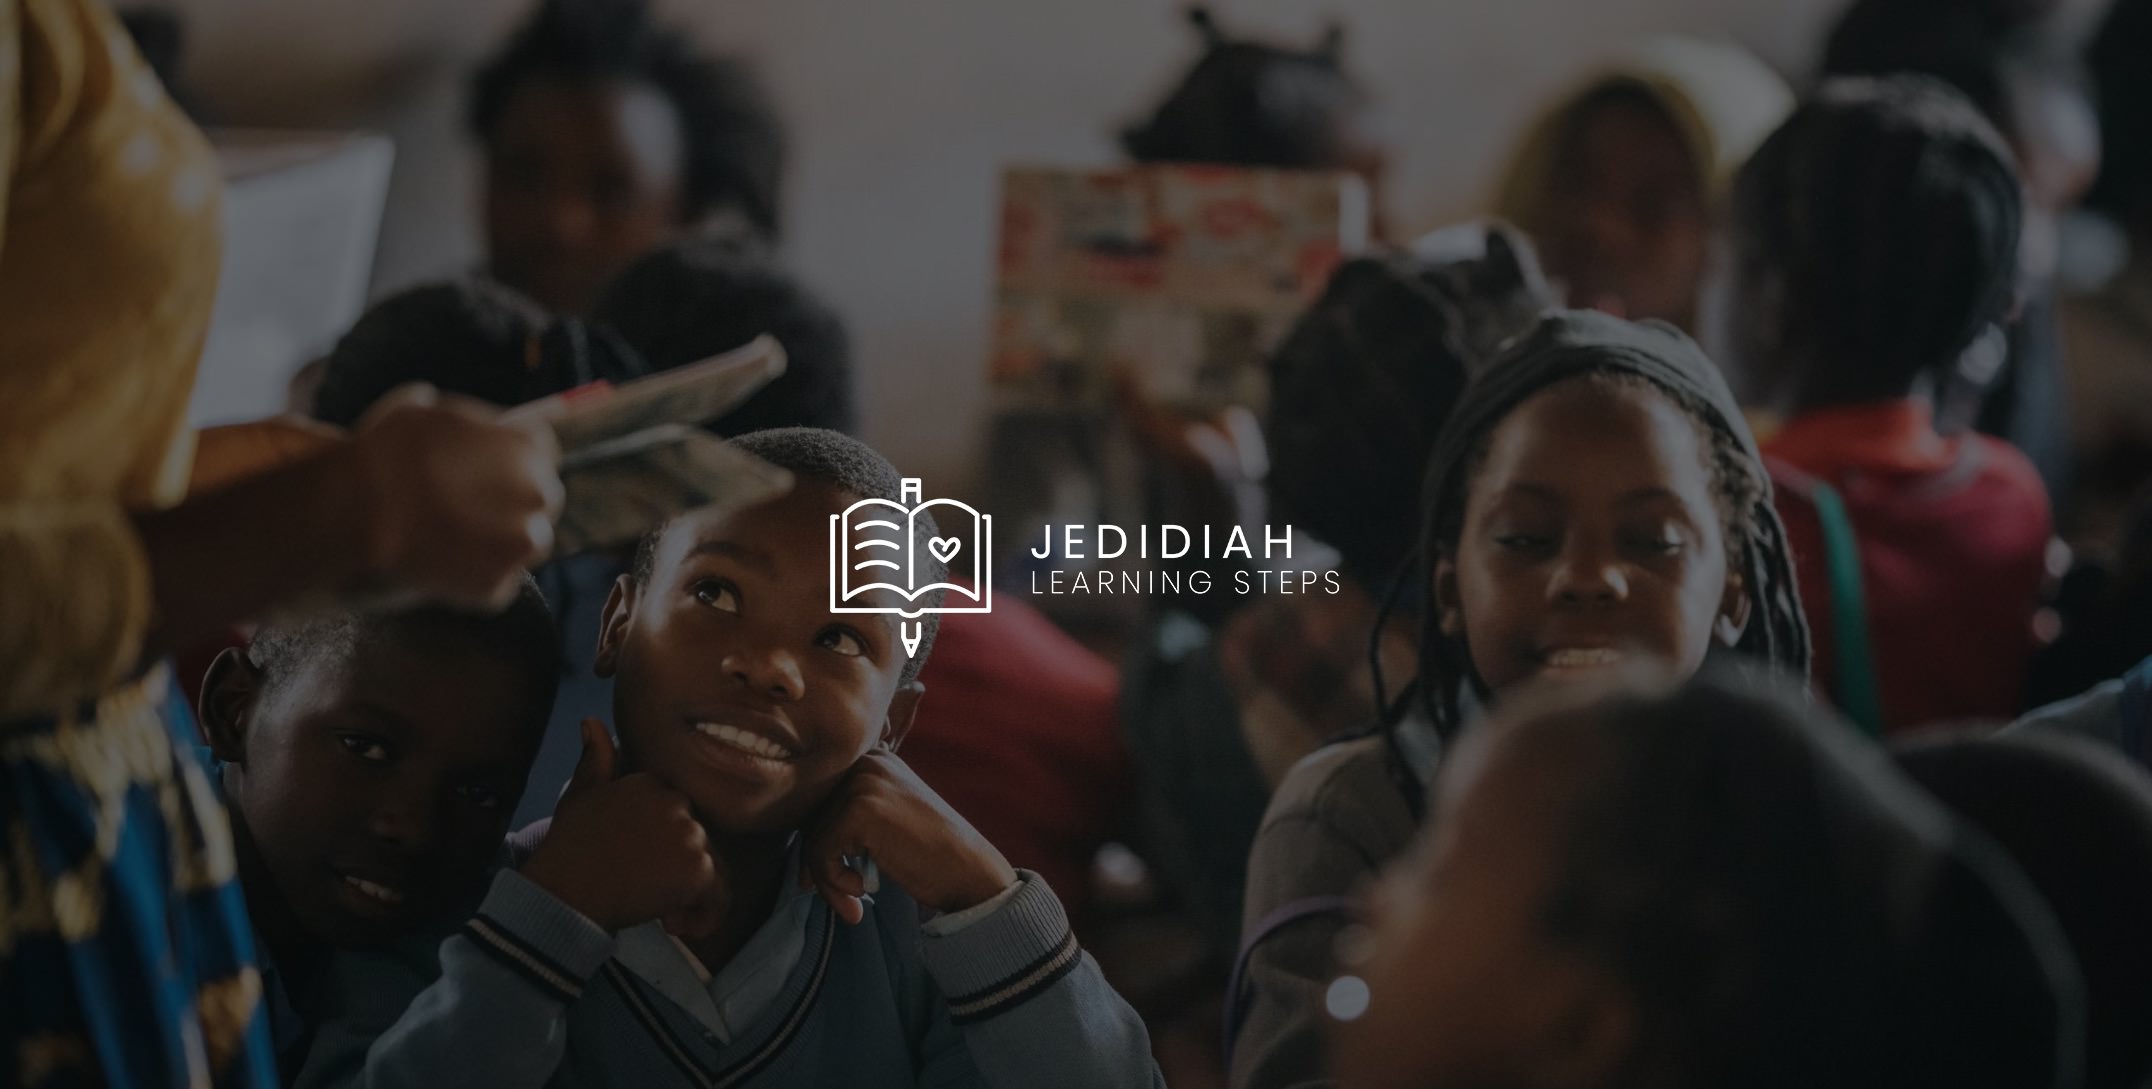 IU C&I Studios Page White Jedidiah Learning Steps logo with background of children in a classroom